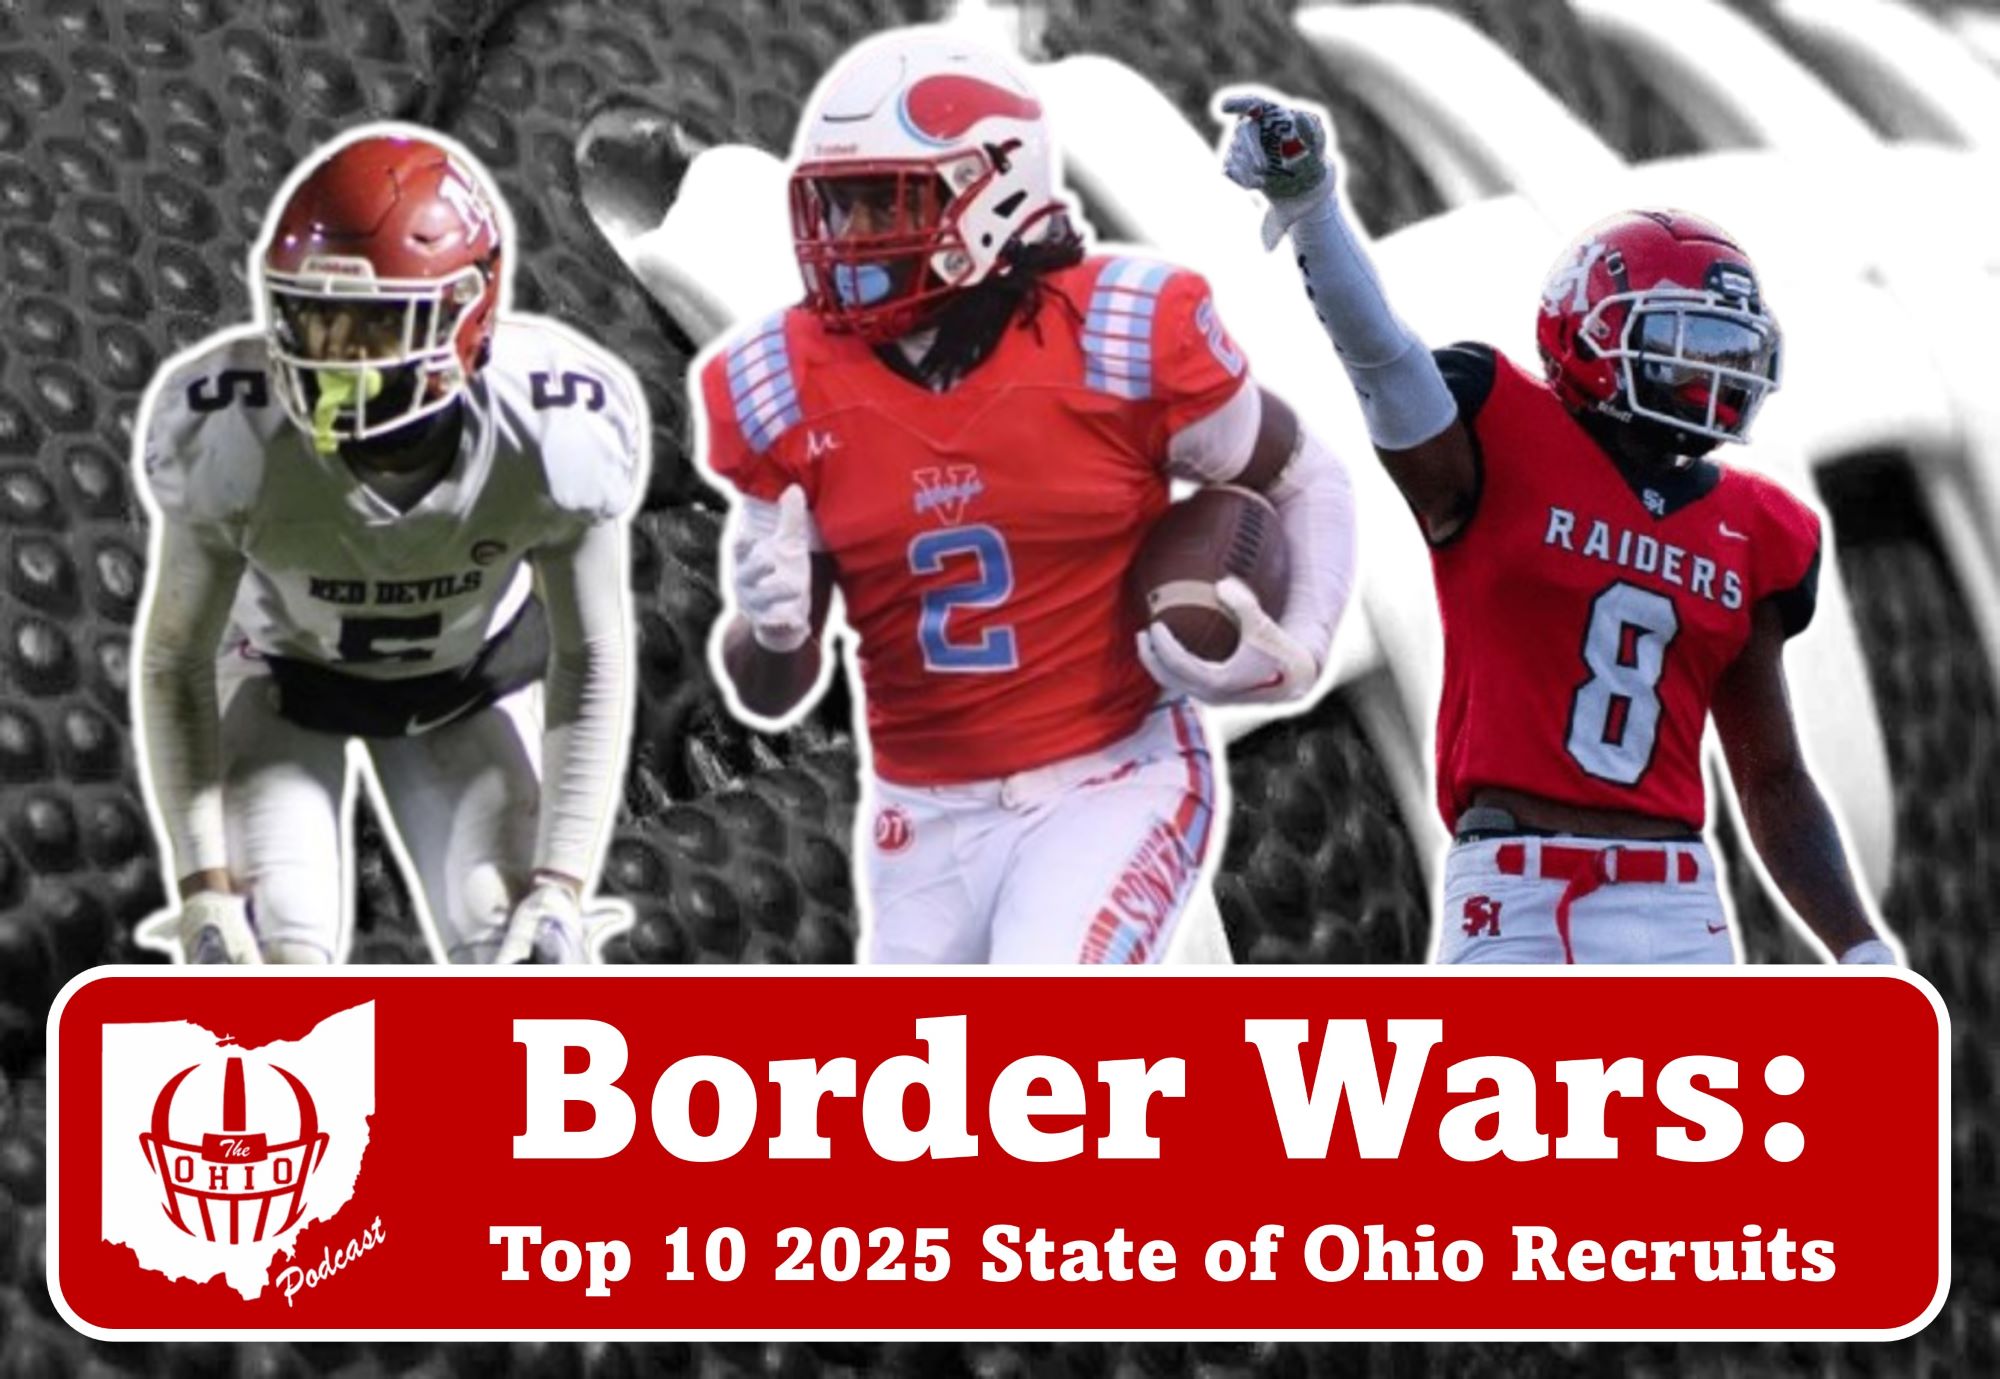 Top 10 2025 State of Ohio Recruits